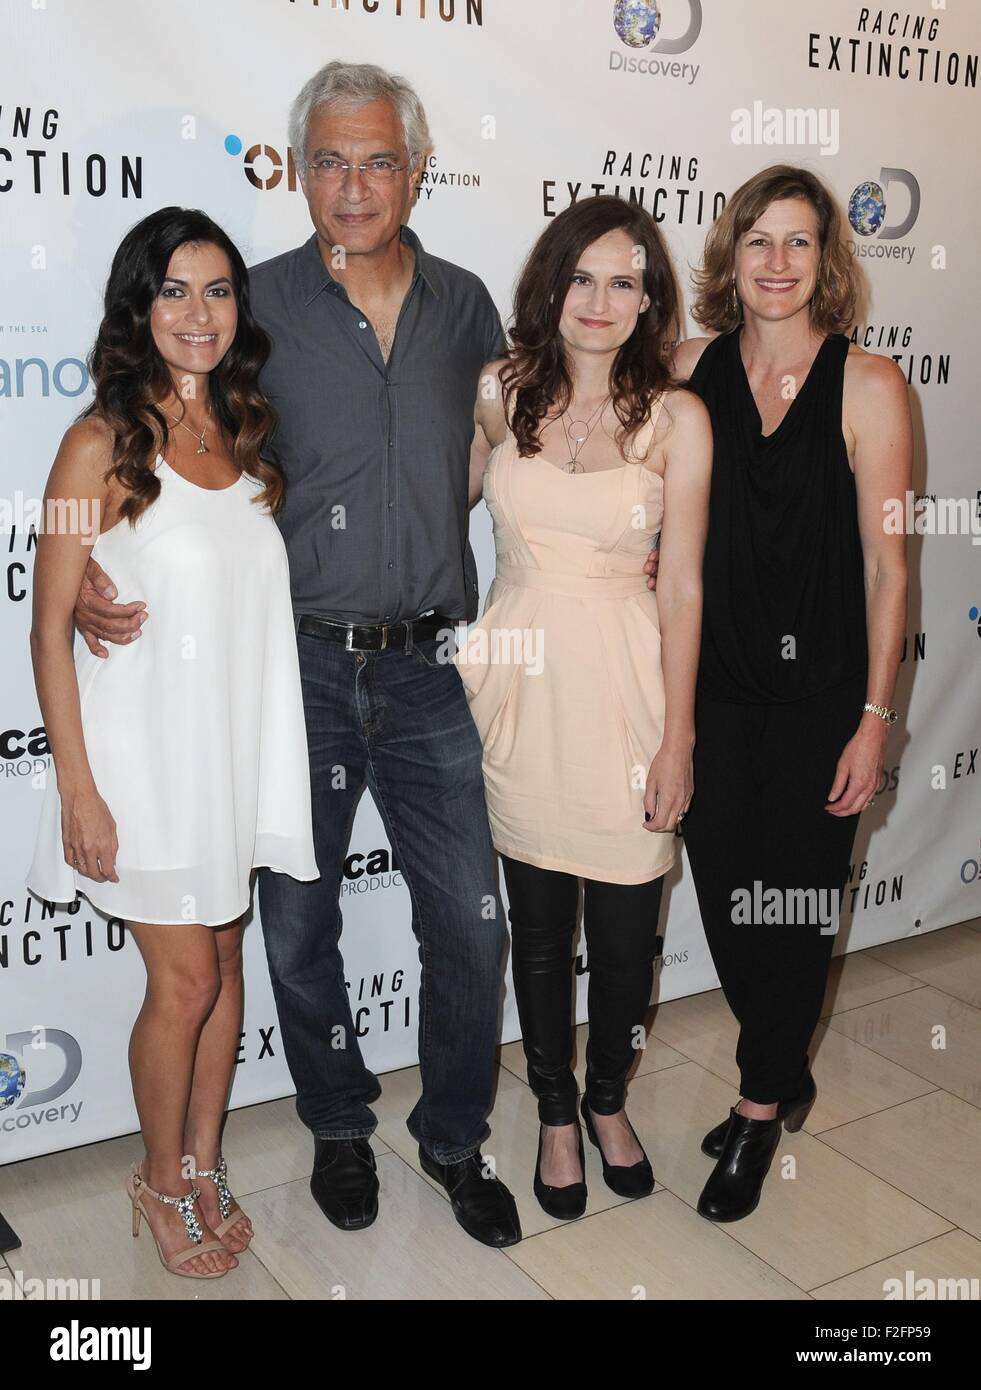 Los Angeles, CA, USA. 17th Sep, 2015. Leilani Munter, Louis Psihoyos, Gina Papabeis, Olivia Ahnemann at arrivals for RACING EXTINCTION Premiere, The London West Hollywood, Los Angeles, CA September 17, 2015. Credit:  Dee Cercone/Everett Collection/Alamy Live News Stock Photo